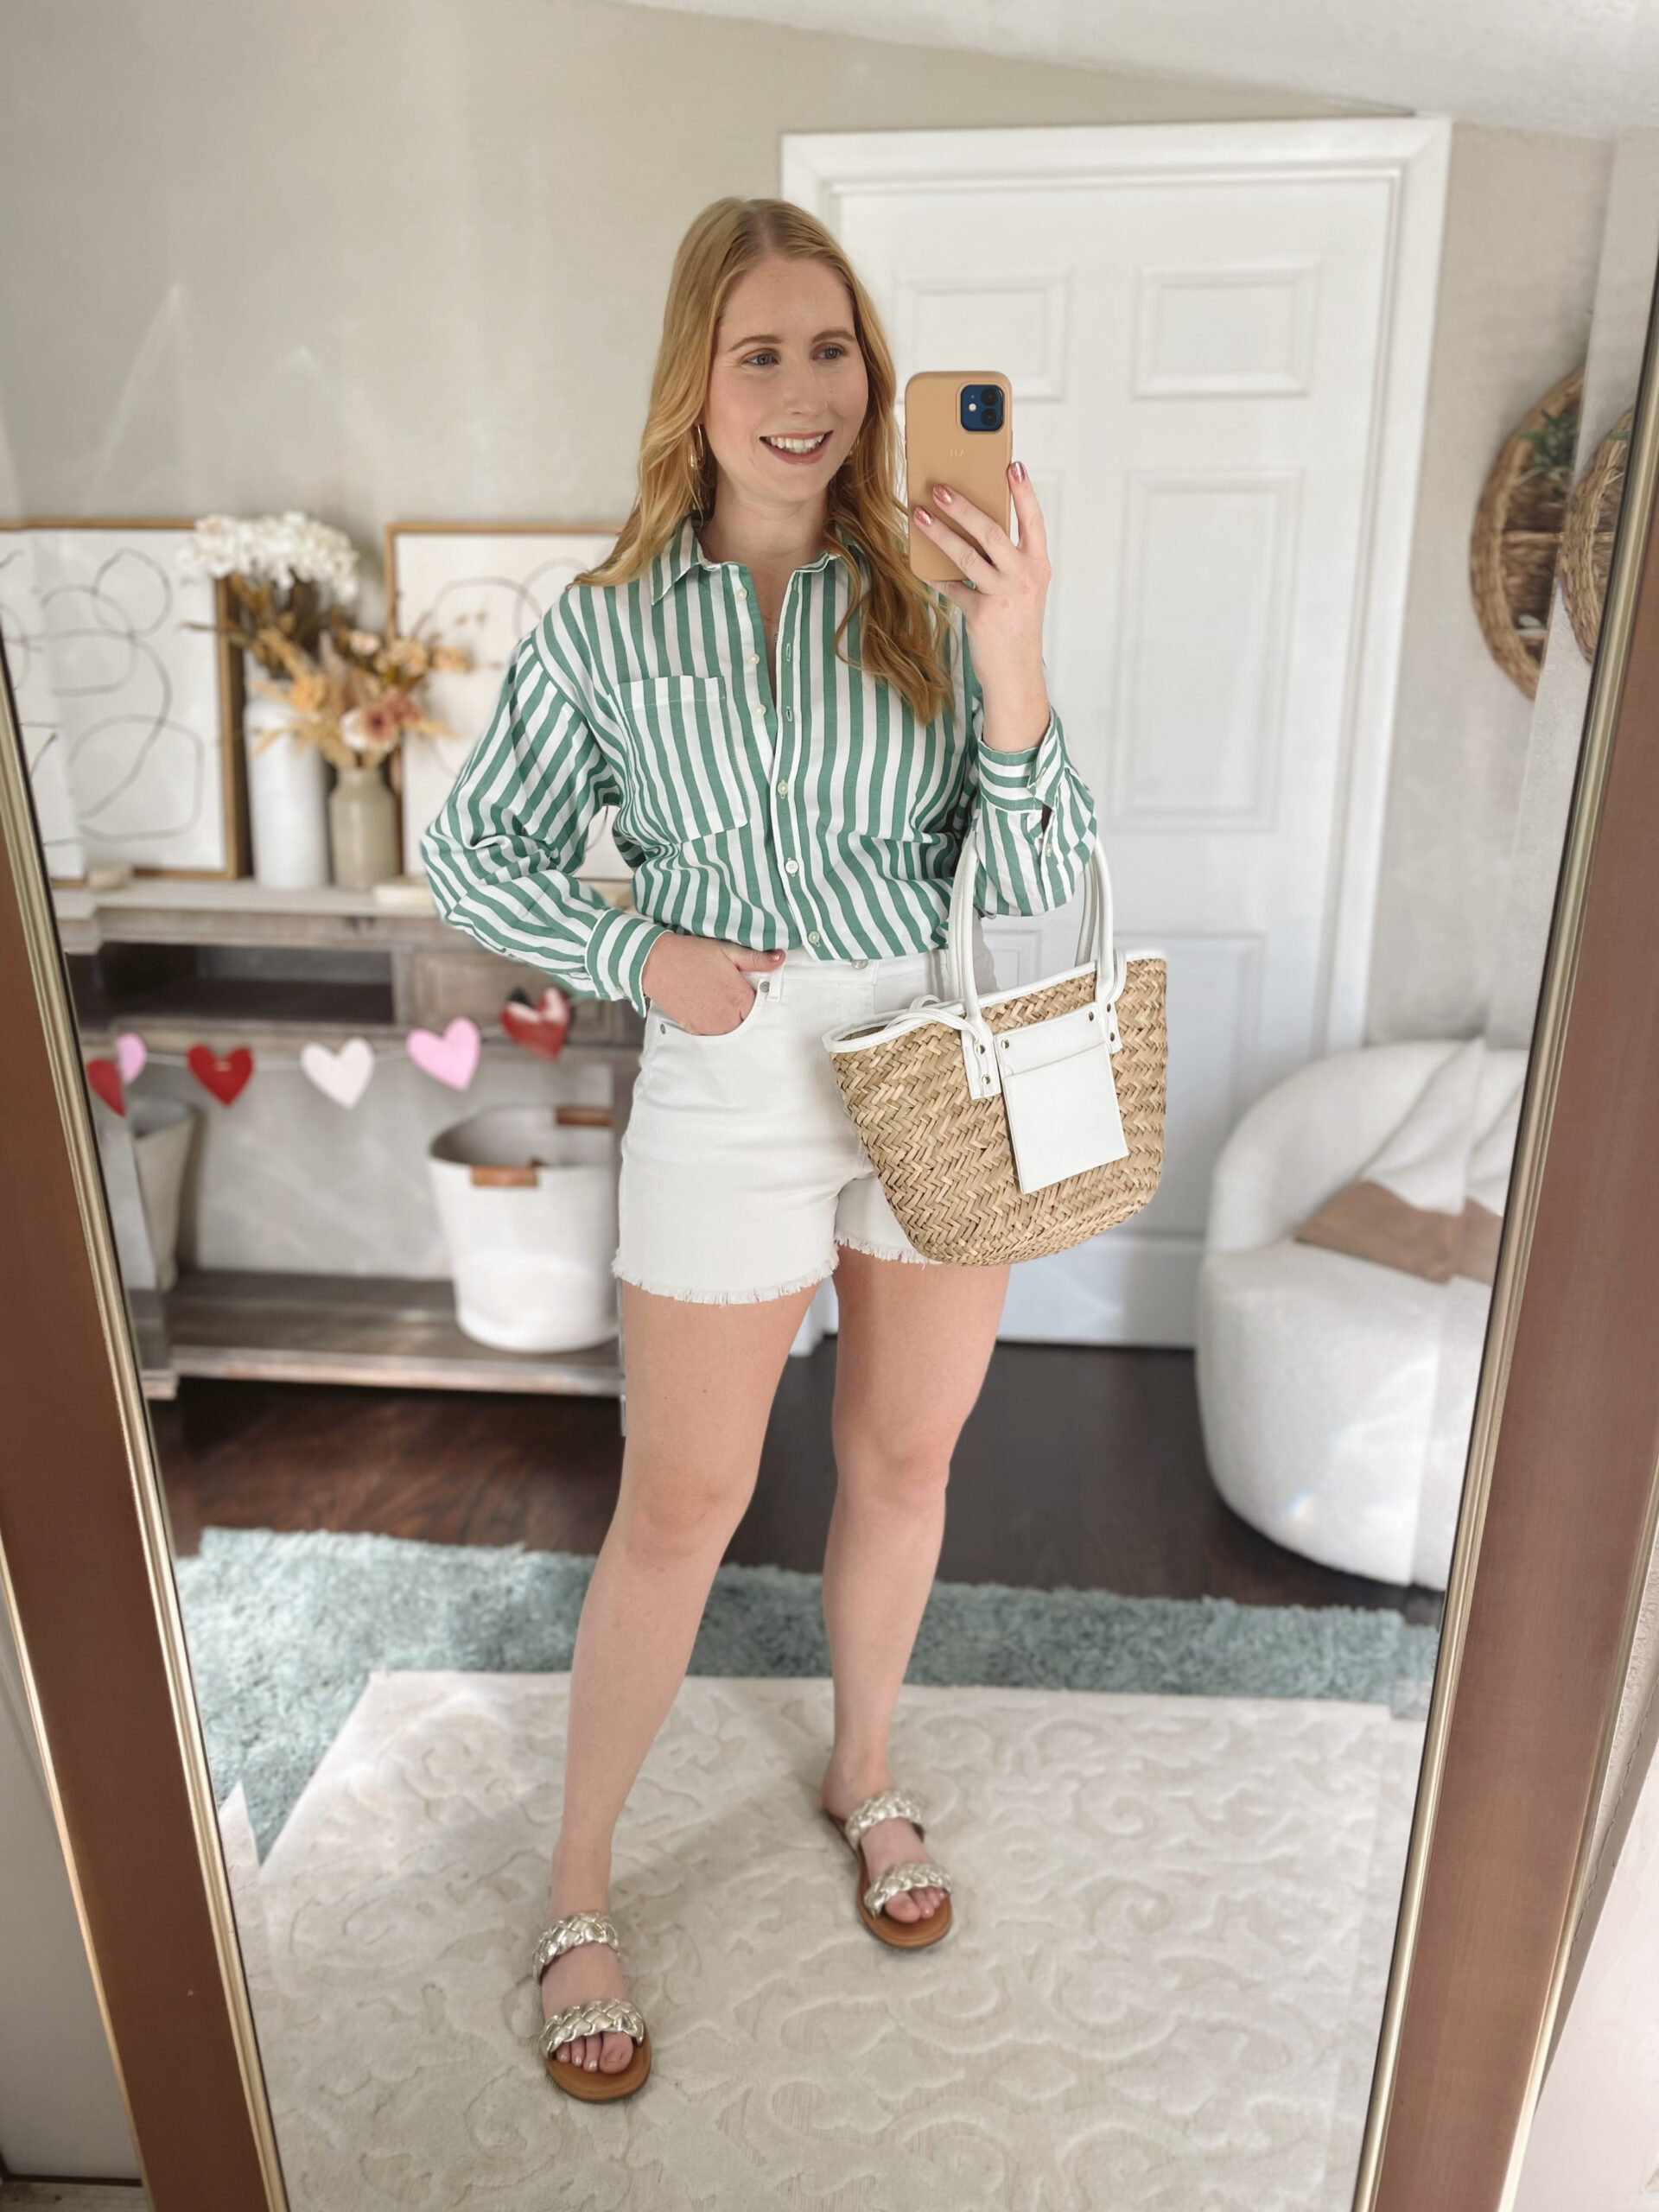 Green Striped Button Down, white denim shorts, metallic sandals | 10 Best Cruise Outfits ideas in 2023 - 10 Cruise Outfit Ideas for Women - 10 Day Caribbean Cruise Mid Size Outfit Ideas